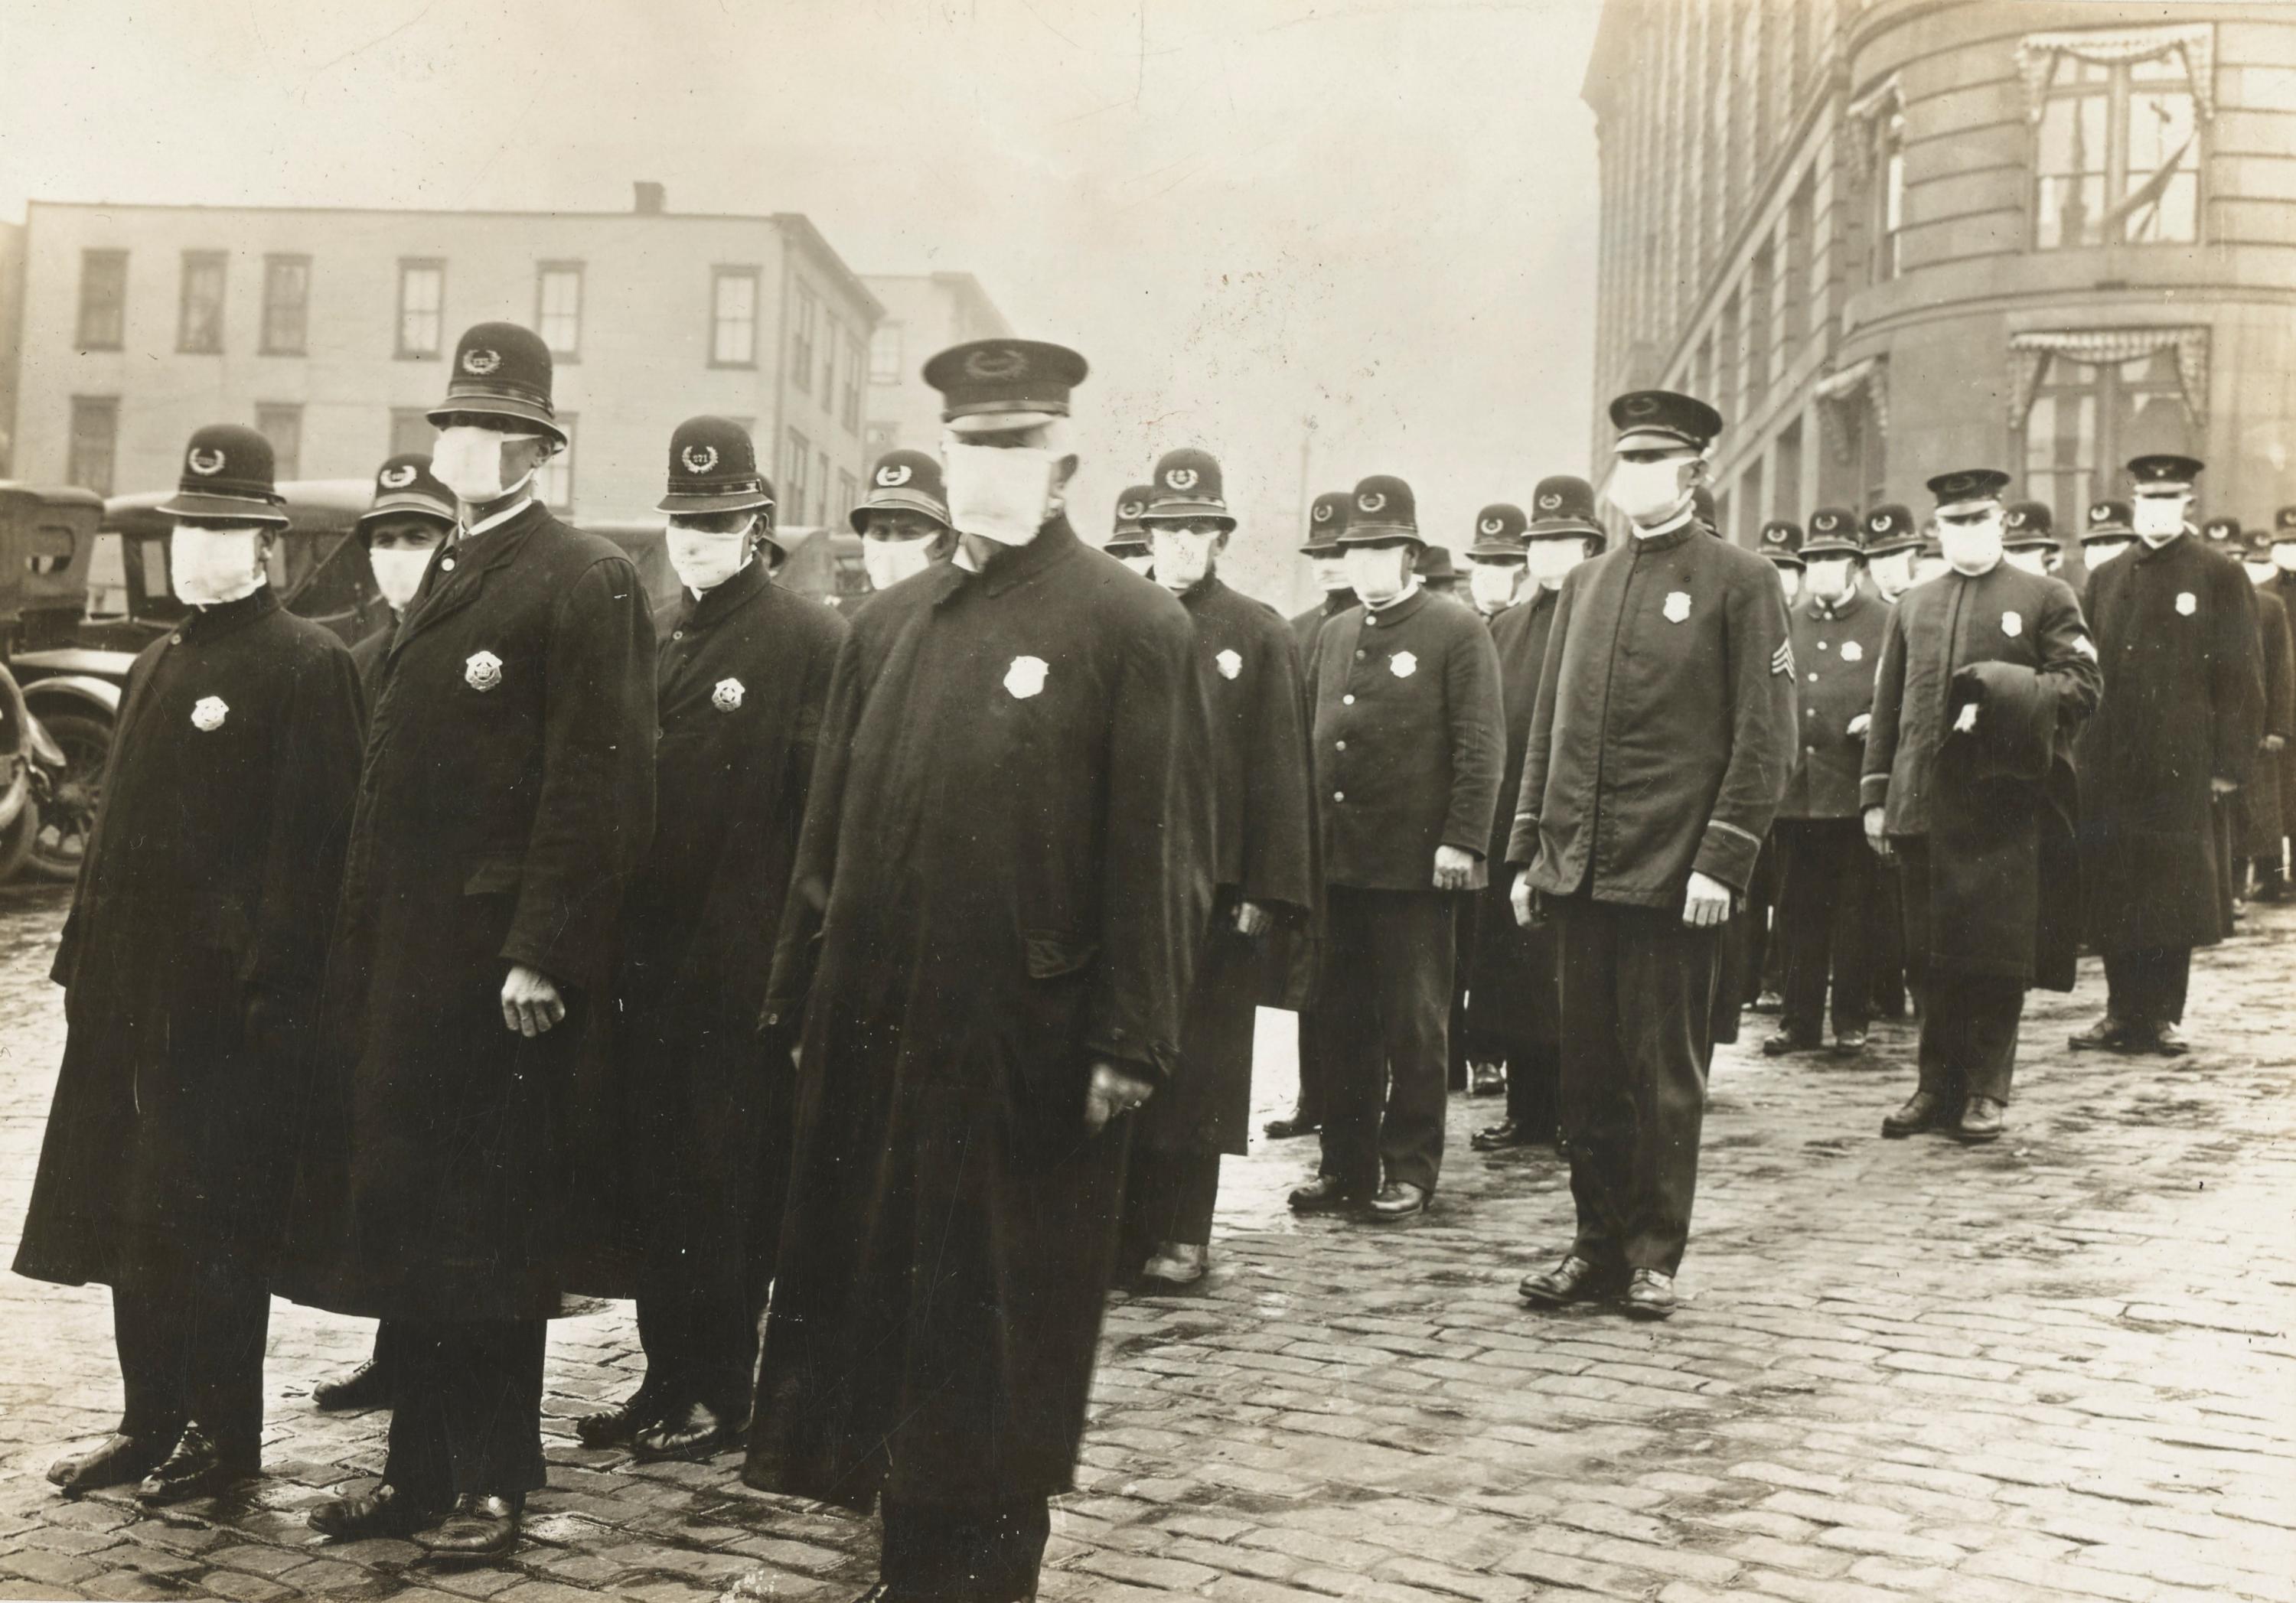 Police officers in Seattle, Washington, don protective face masks during the Spanish flu pandemic. Credit: National Archives